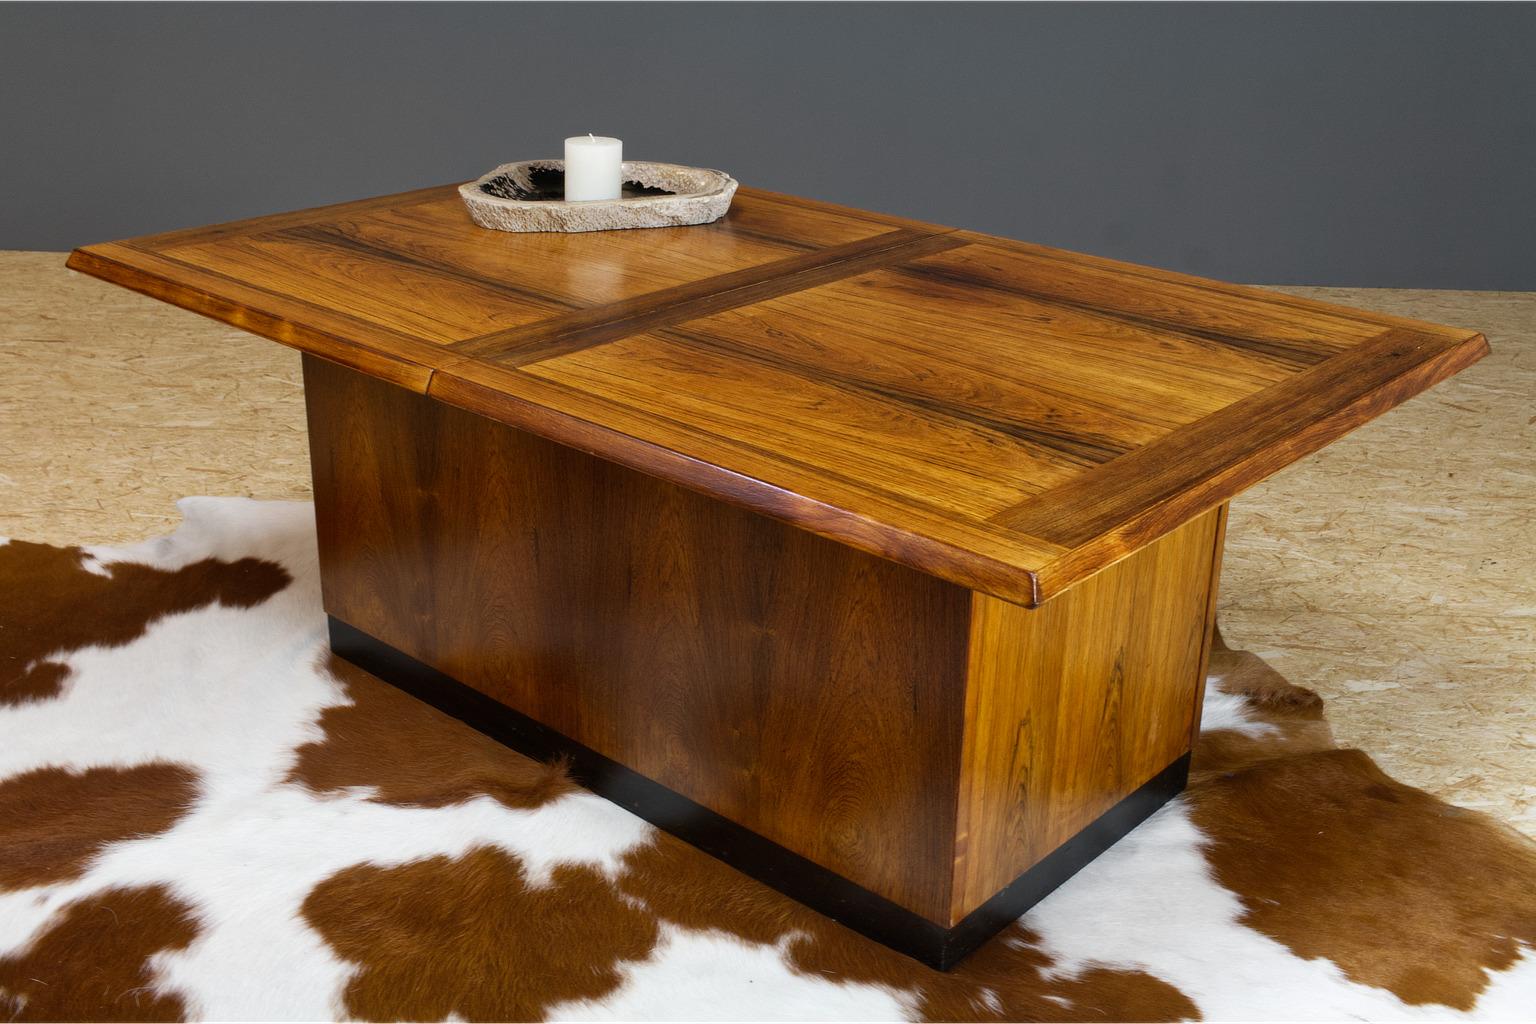 Luxury Danish rosewood coffee table with dry bar in the style of Dyrlund. This beautiful made Scandinavian modern solid coffee table can be unfolded to reveal the hidden cabinet, and with use of the two black trays can be used in an elongated